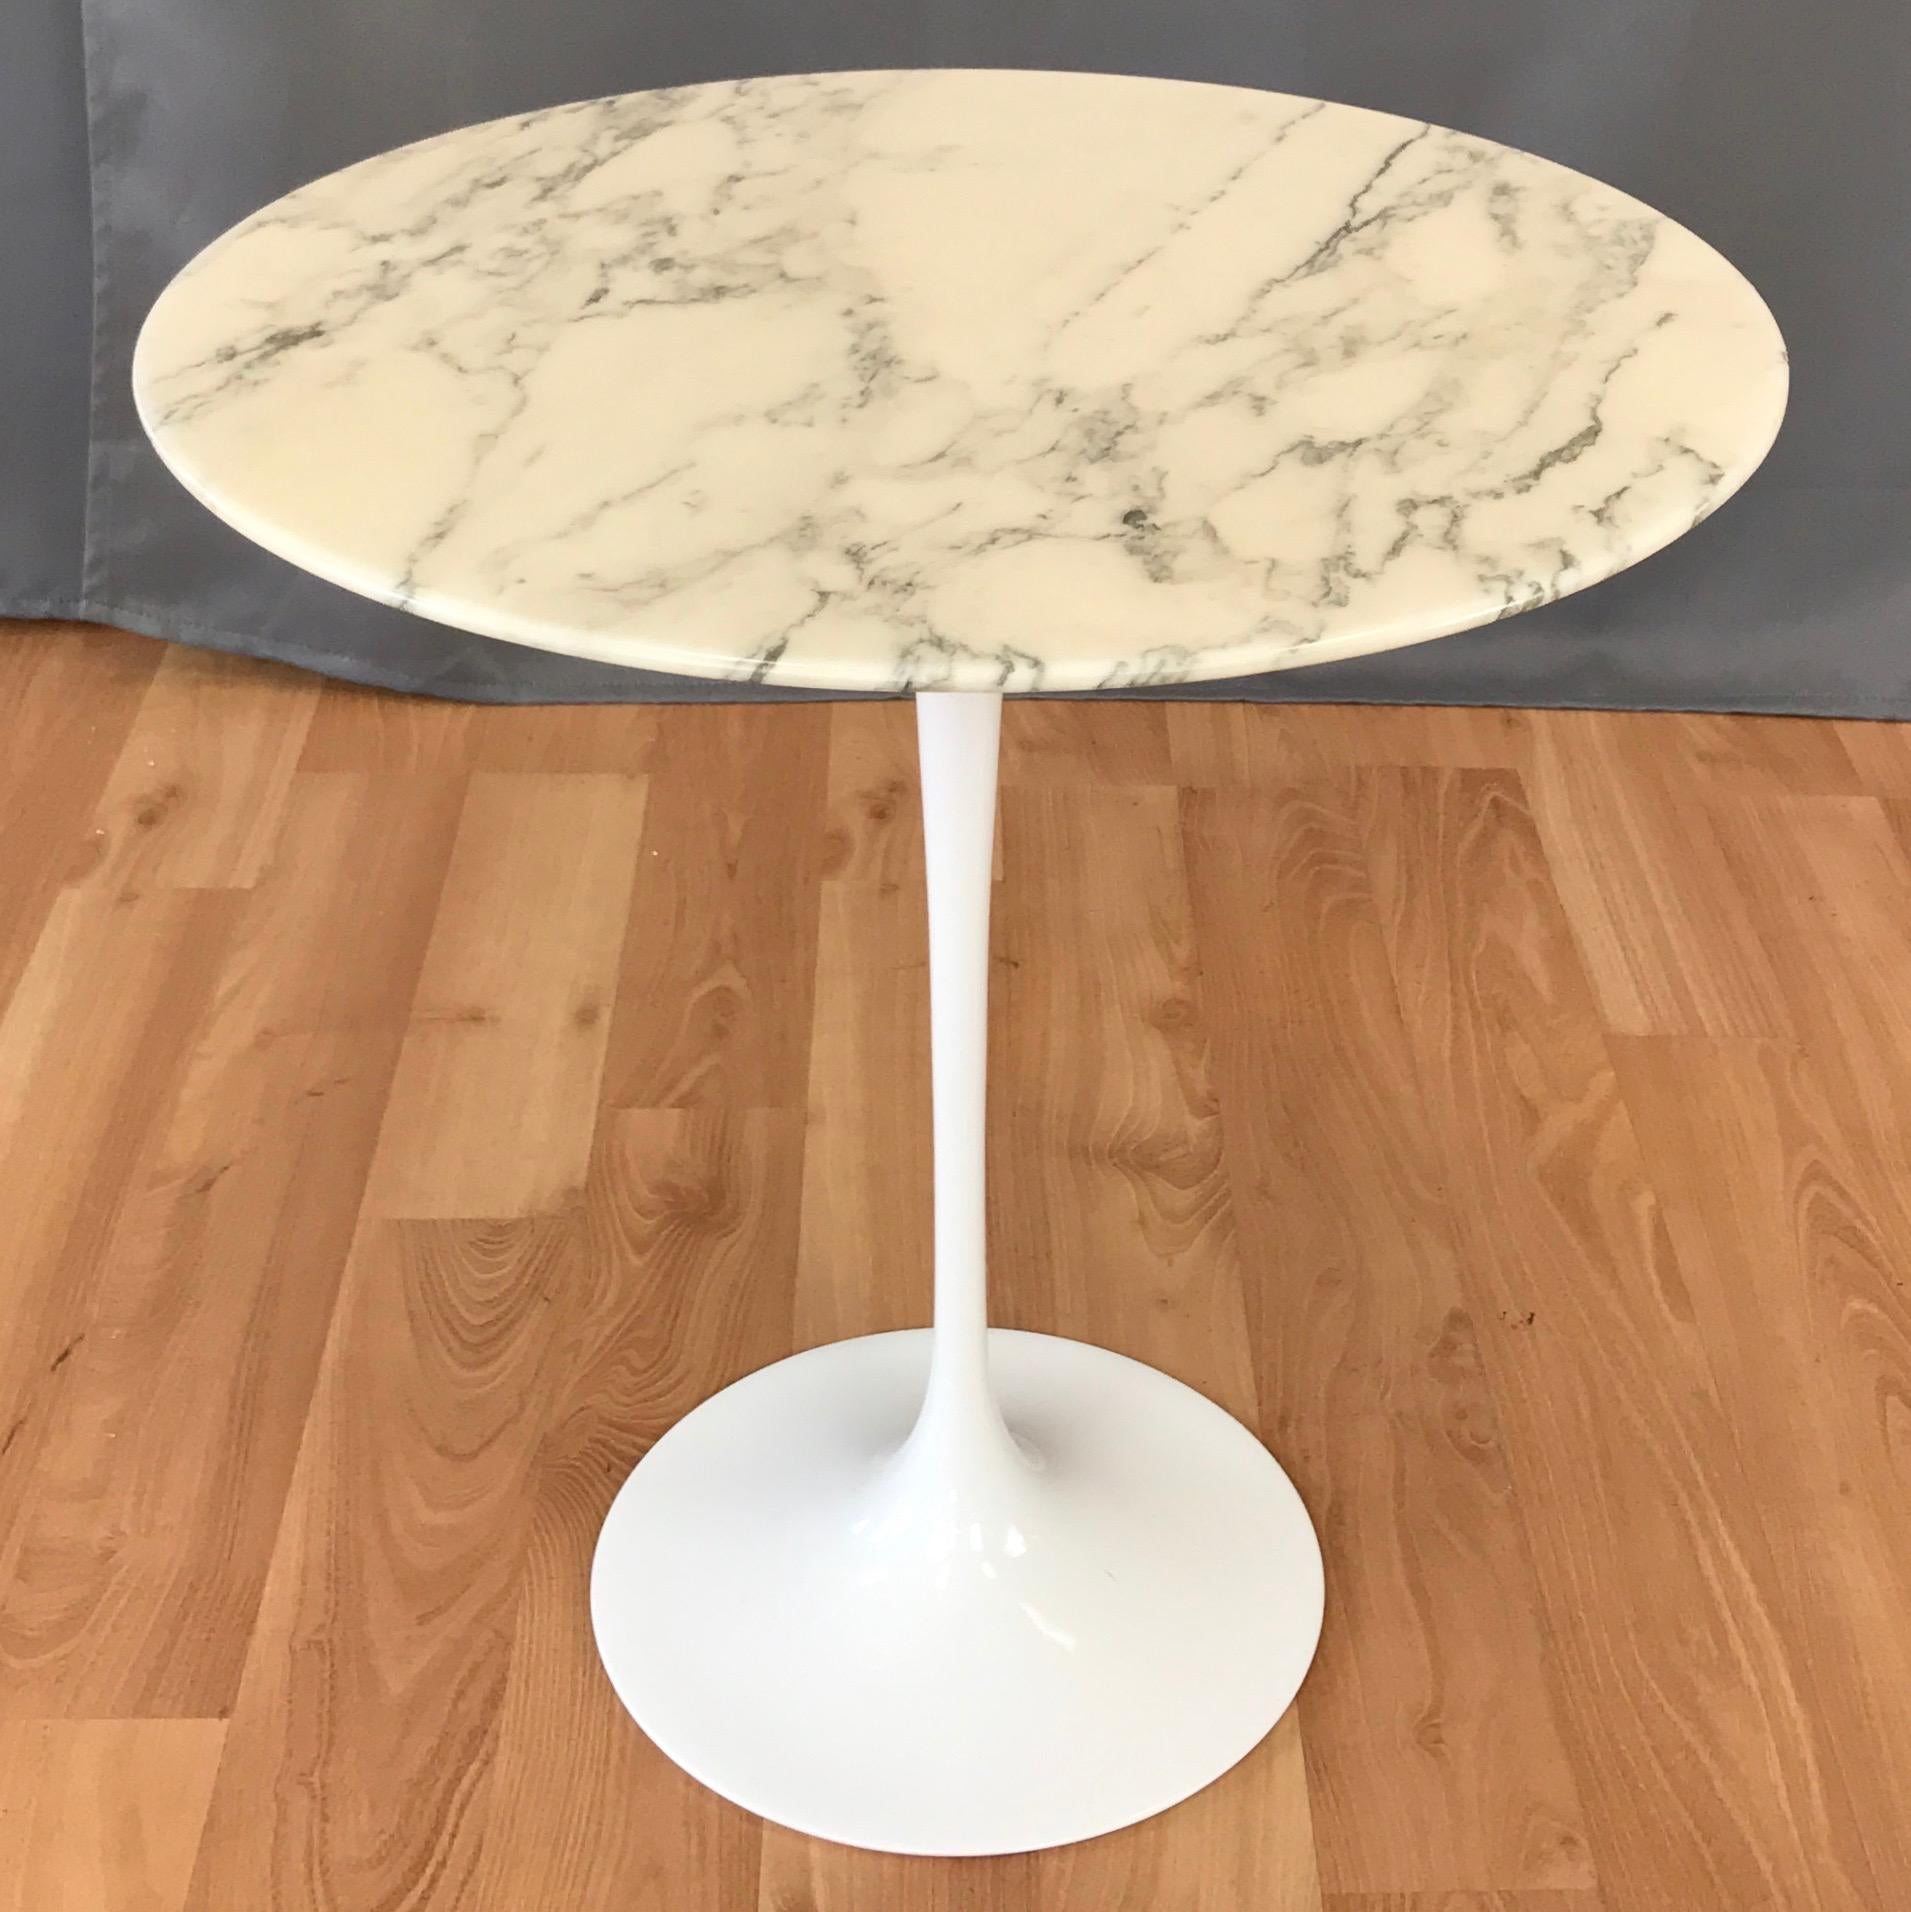 A late 1990s Knoll Studio Pedestal collection marble side table designed by Eero Saarinen in 1956.

The most iconic and timeless of Mid-Century Modern tables, with a round ivory-toned Arabescato marble top protected by a clear polished polyester